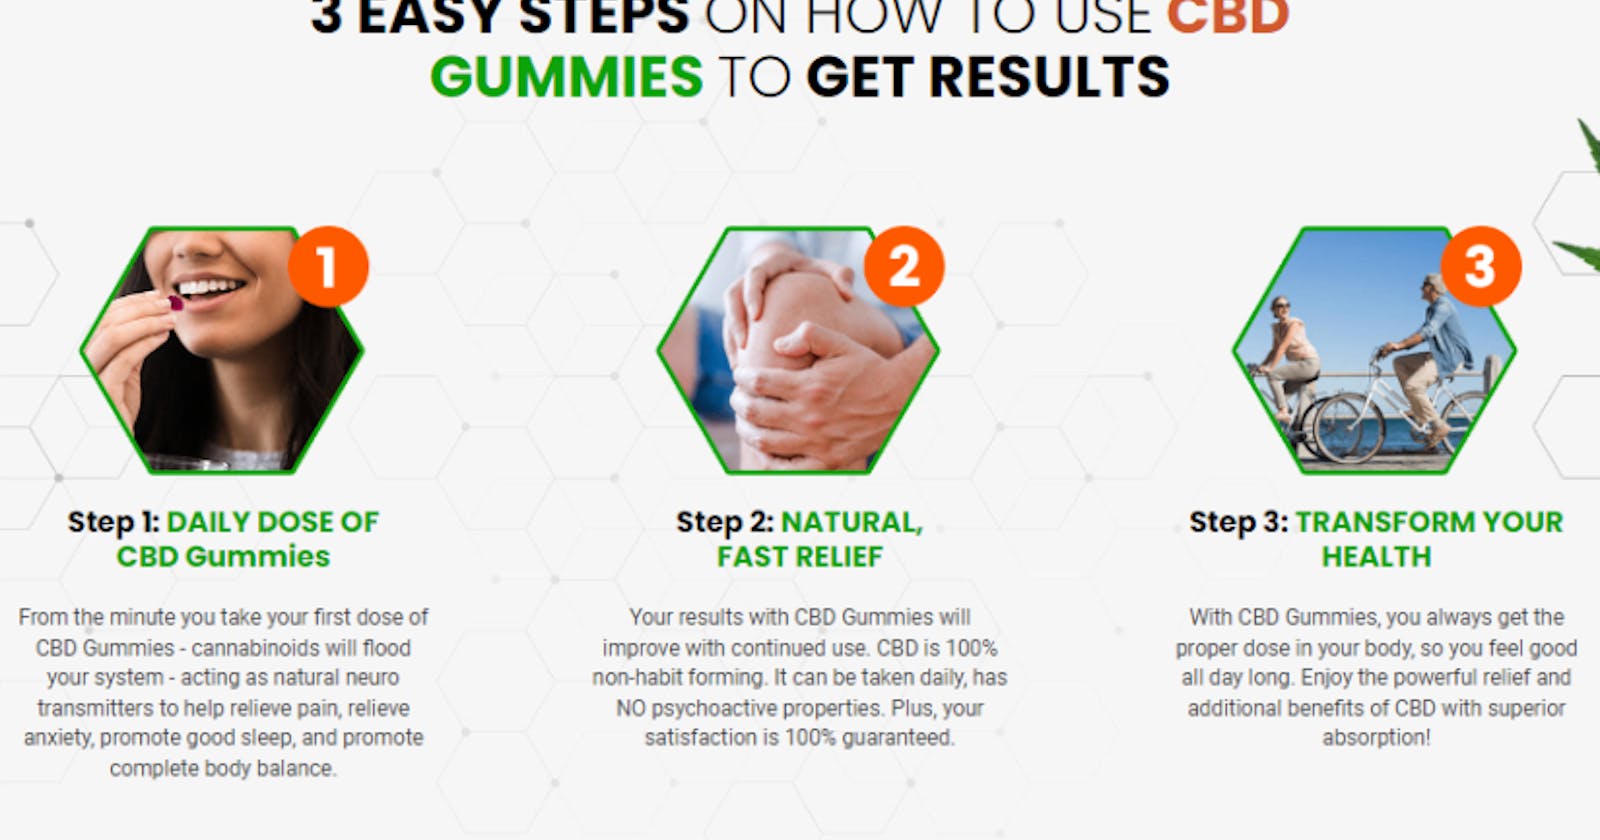 Bioheal CBD Gummies Get Instant Relief, Latest And Original Facts!